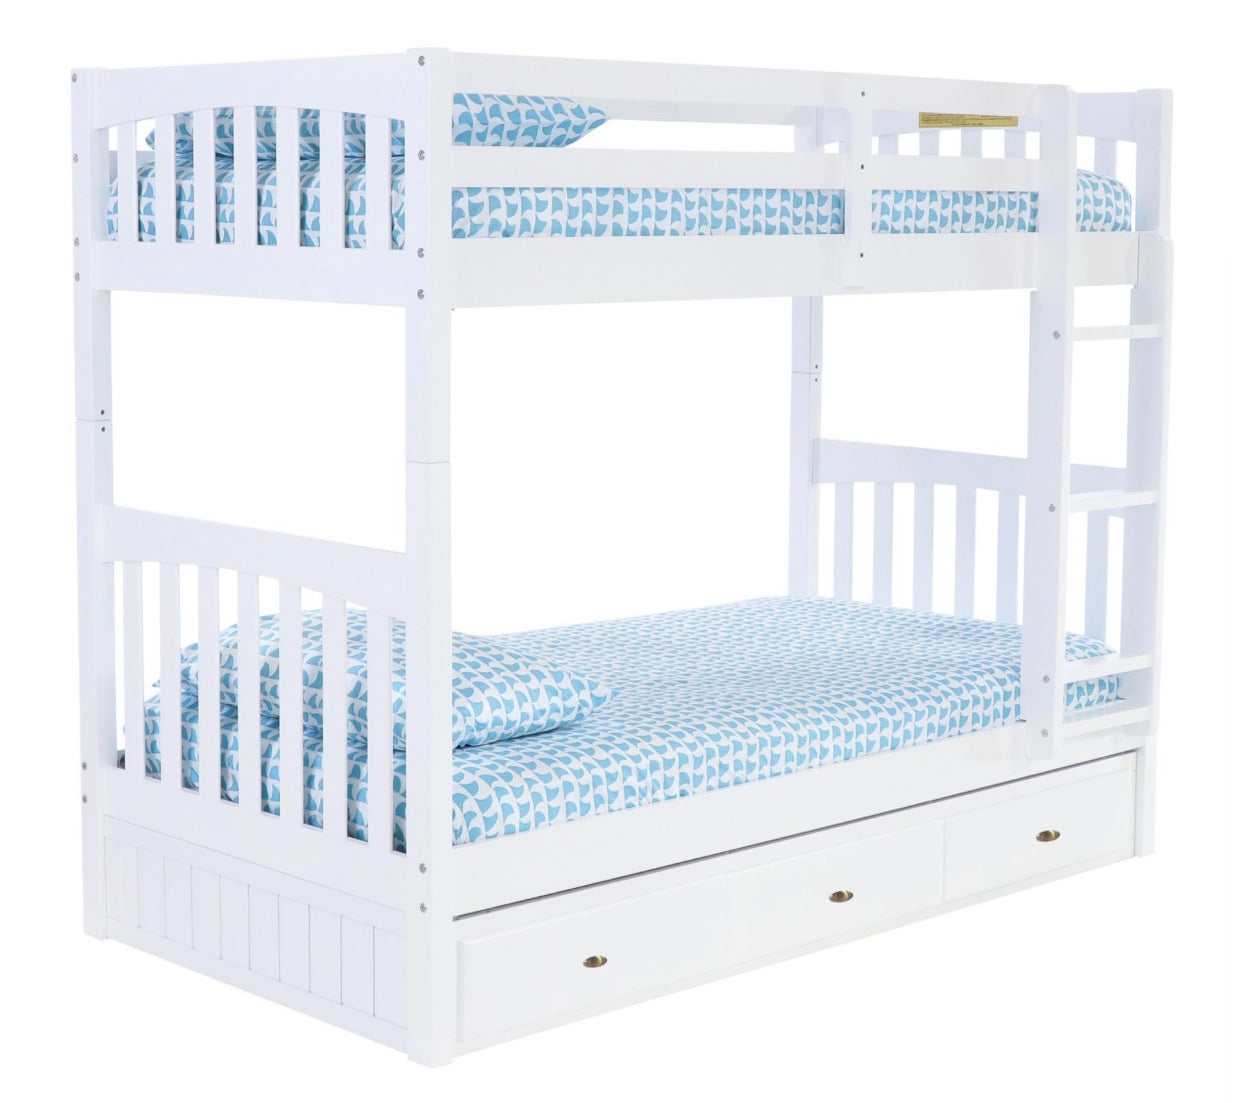 Twin/Twin Bunk Bed w/ 3 Drawers White (Brushed Nickel Handles) 0211M-K3-R